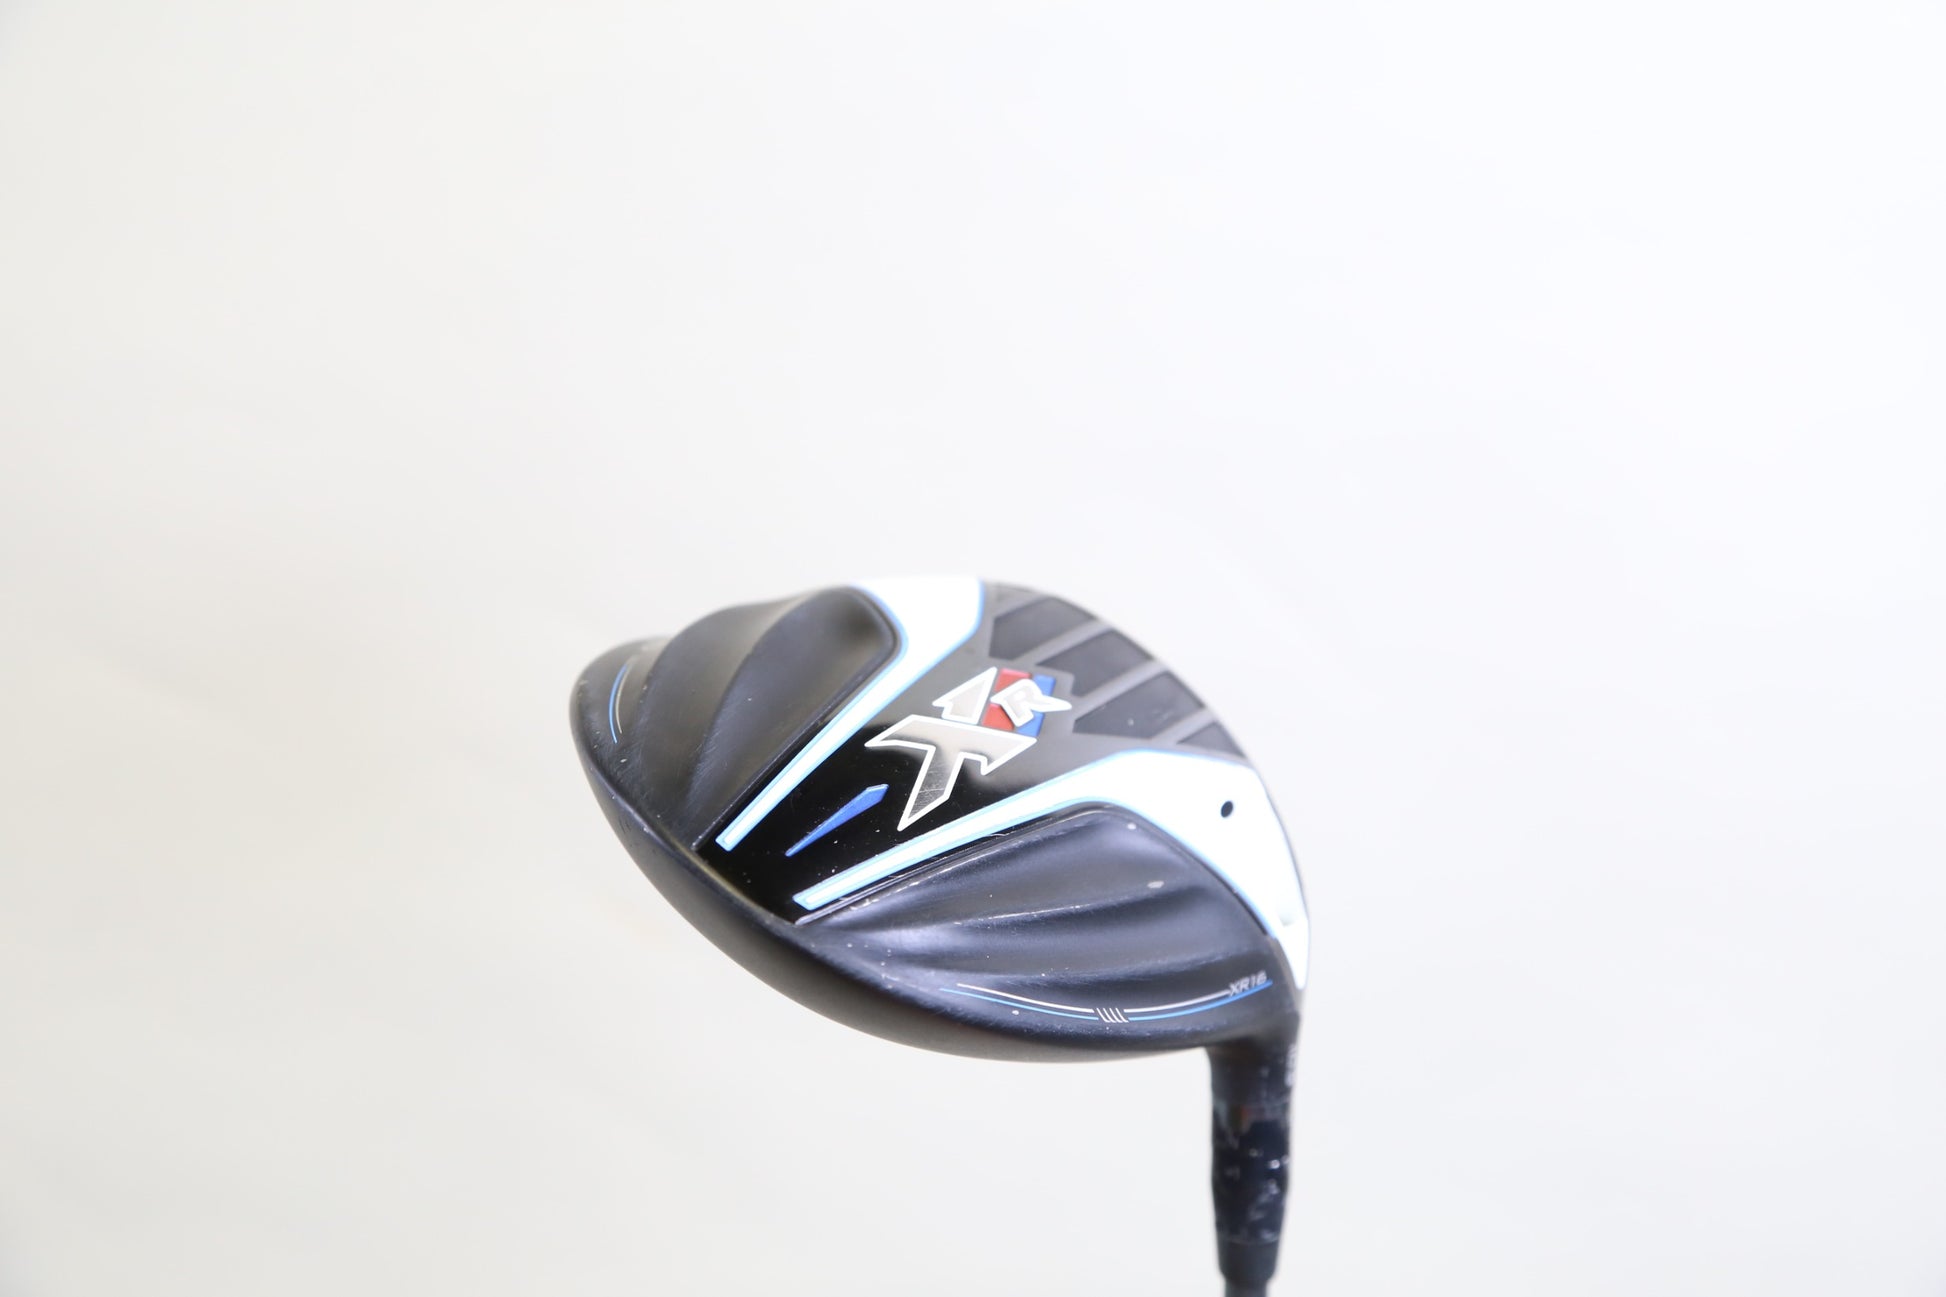 Used Callaway XR 16 Driver - Right-Handed - 10.5 Degrees - Ladies Flex-Next Round